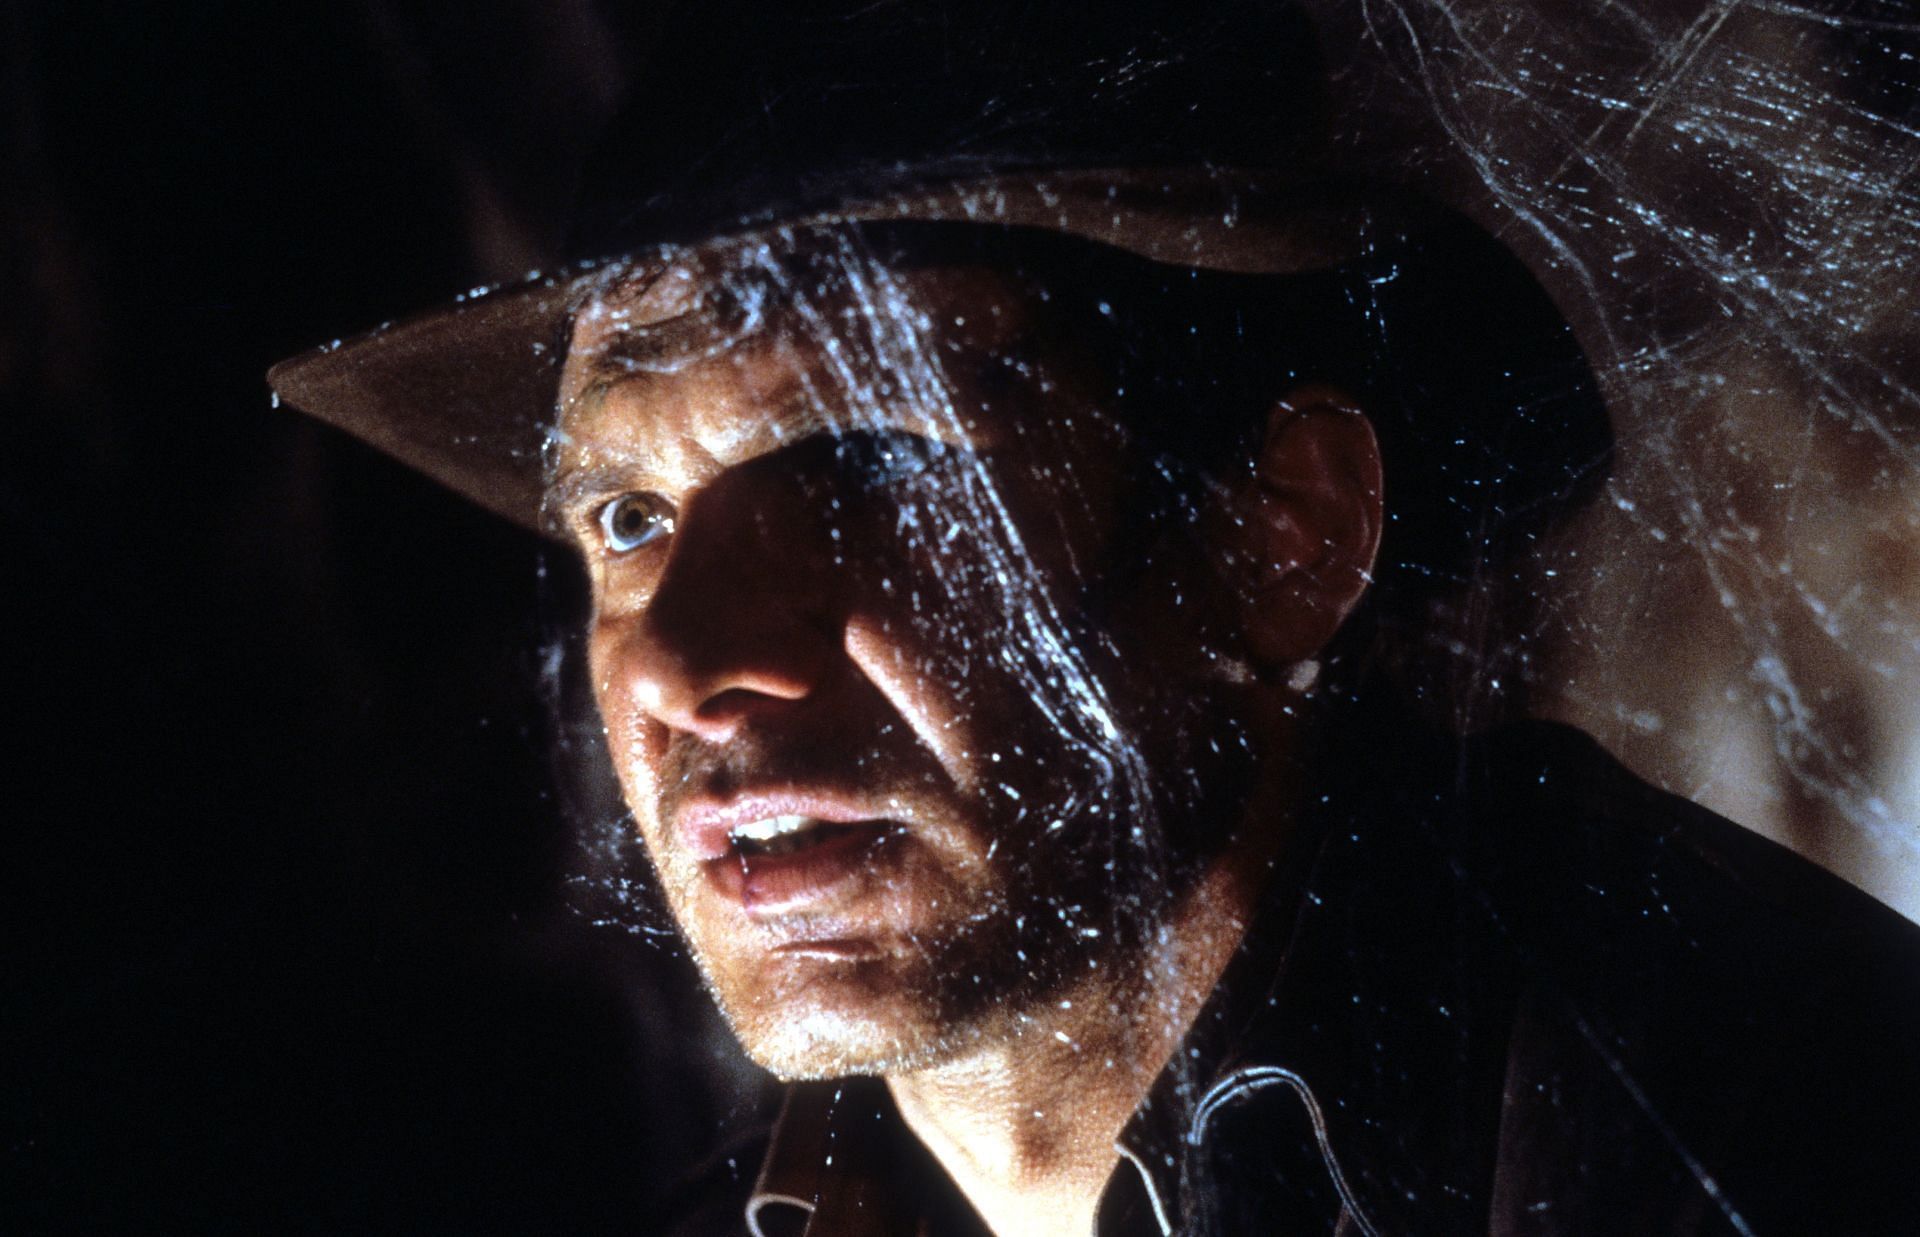 Harrison Ford in Indiana Jones and the Last Crusade (Photo by Paramount Pictures/Getty Images/via IMDb)